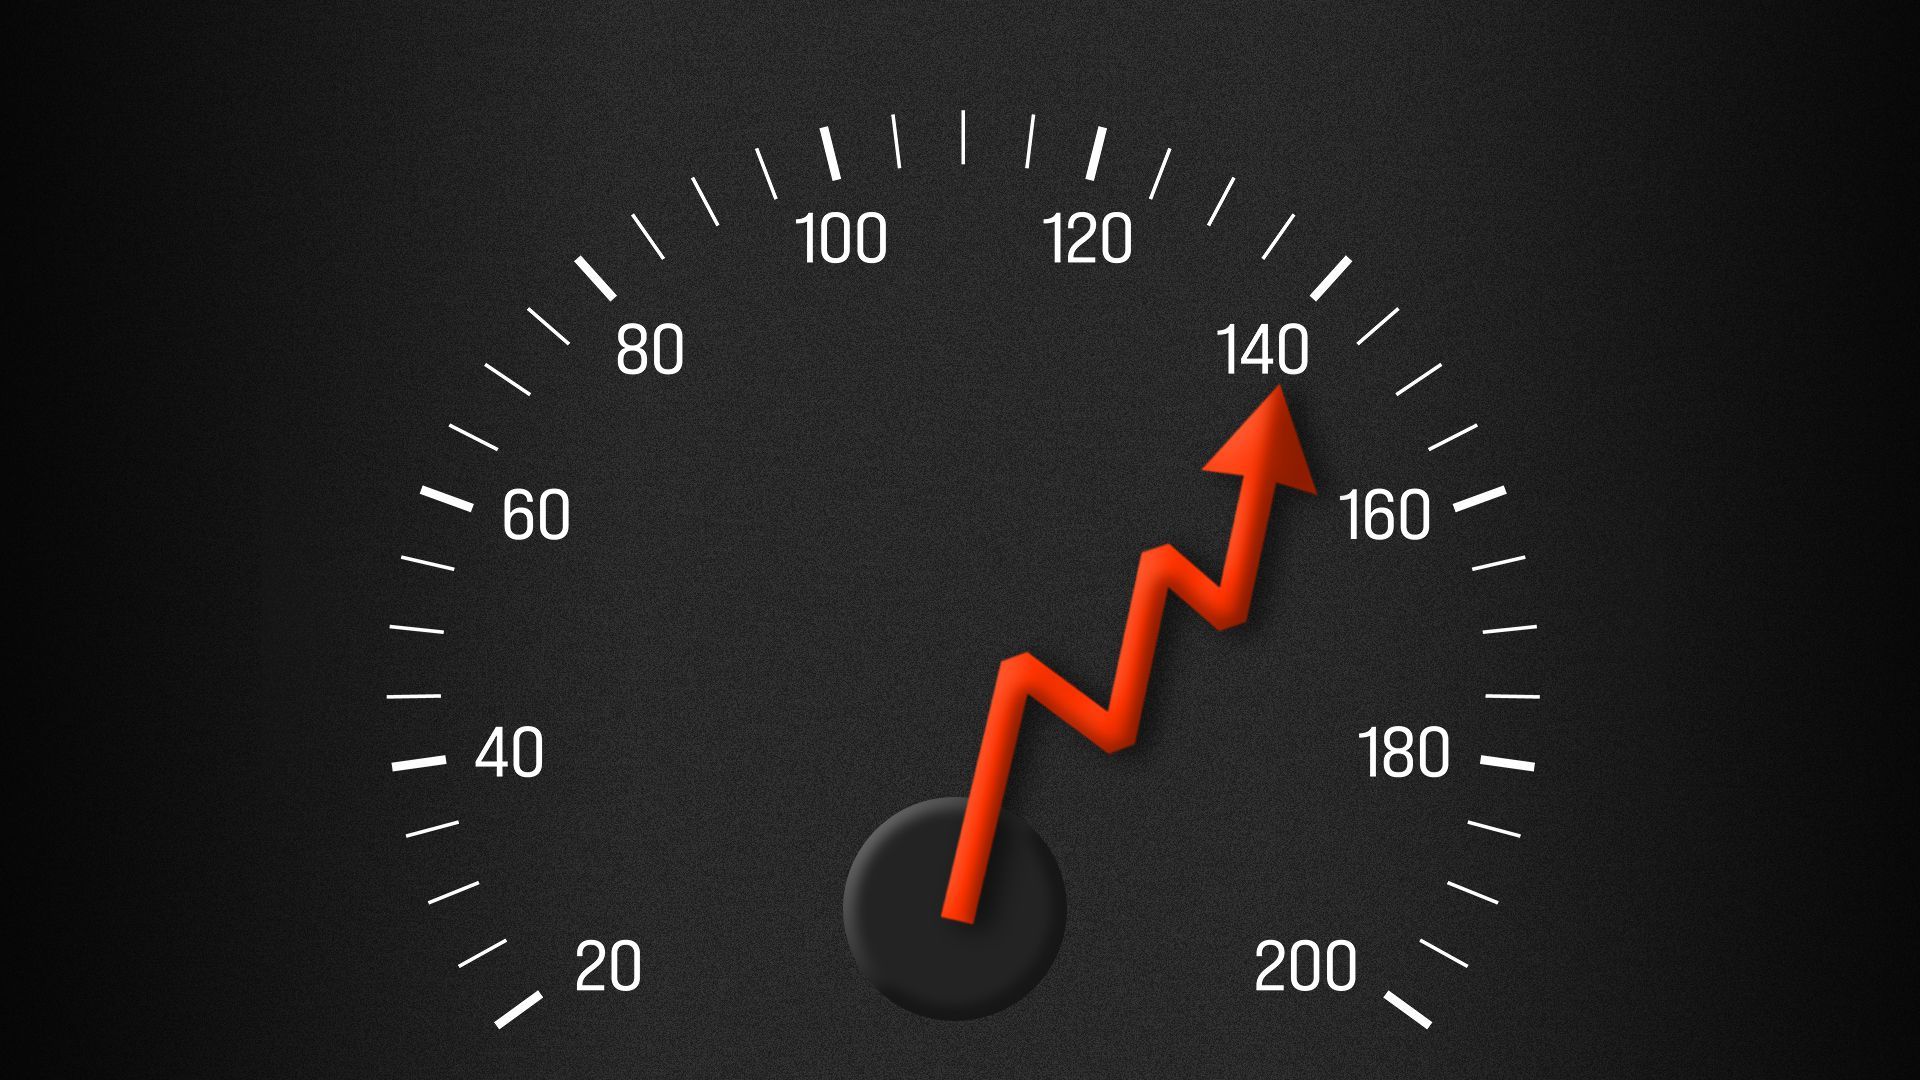 Illustration of a speedometer with a needle shaped like a red upward trending stock line 